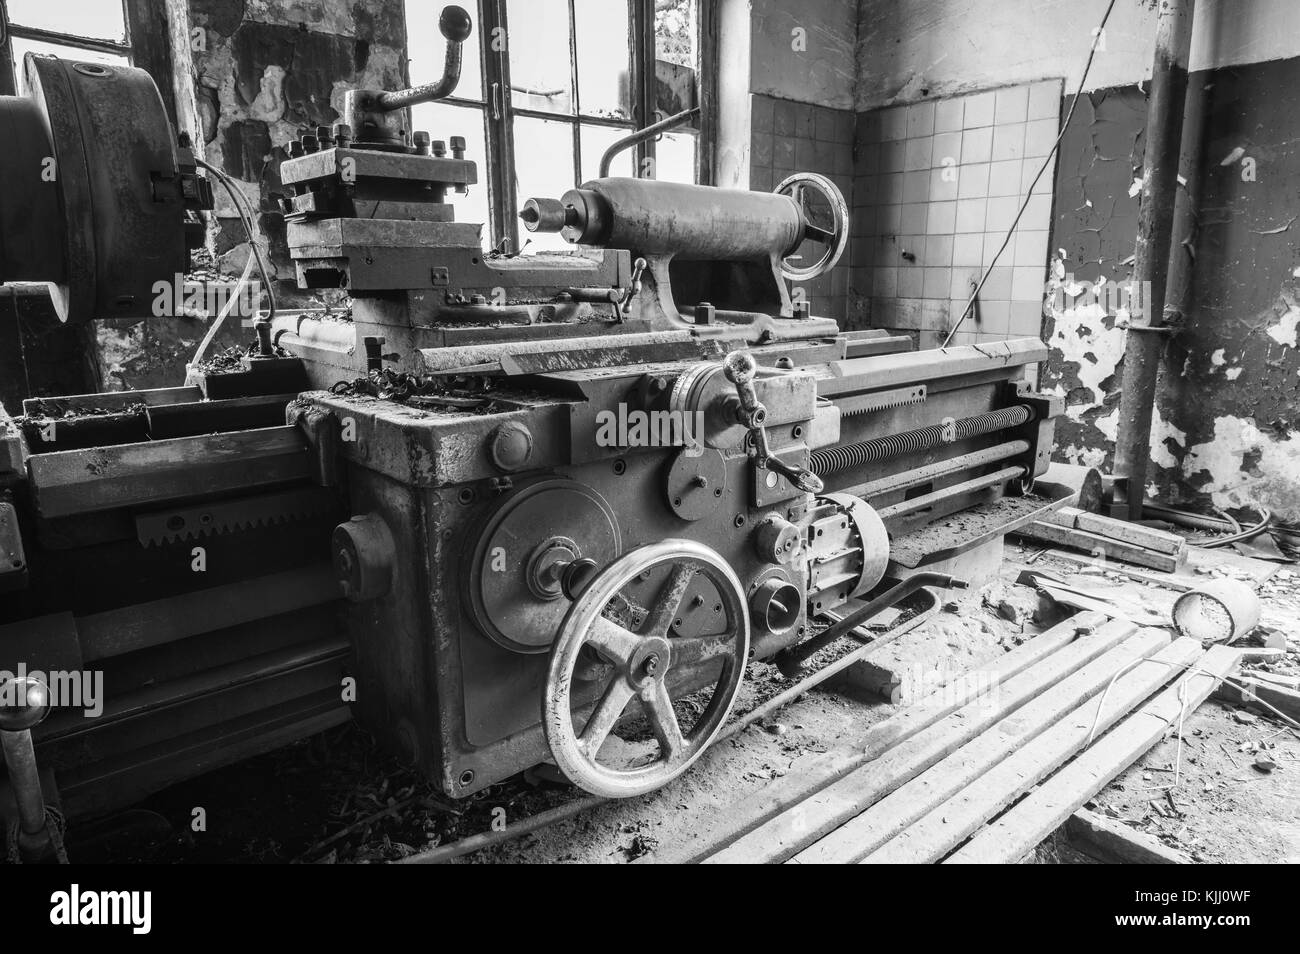 Old abandoned factory rooms, lathes Stock Photo